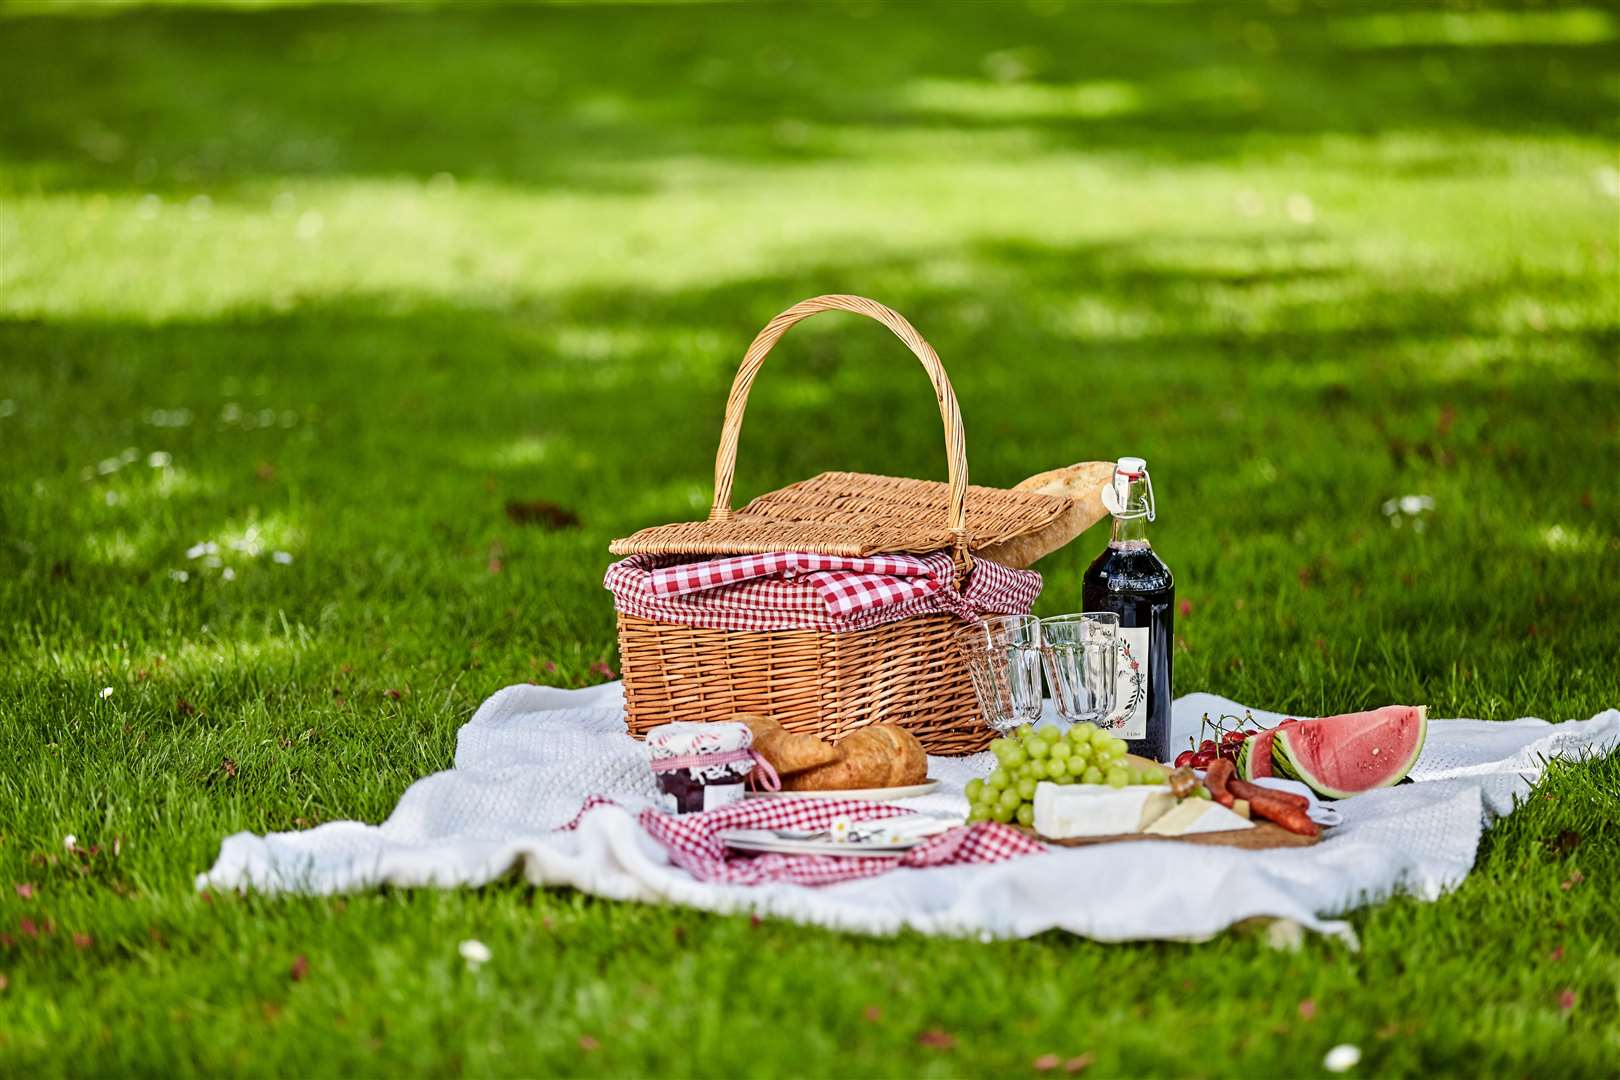 Queenspark Residents Association will be hosting a fun picnic event this weekend.